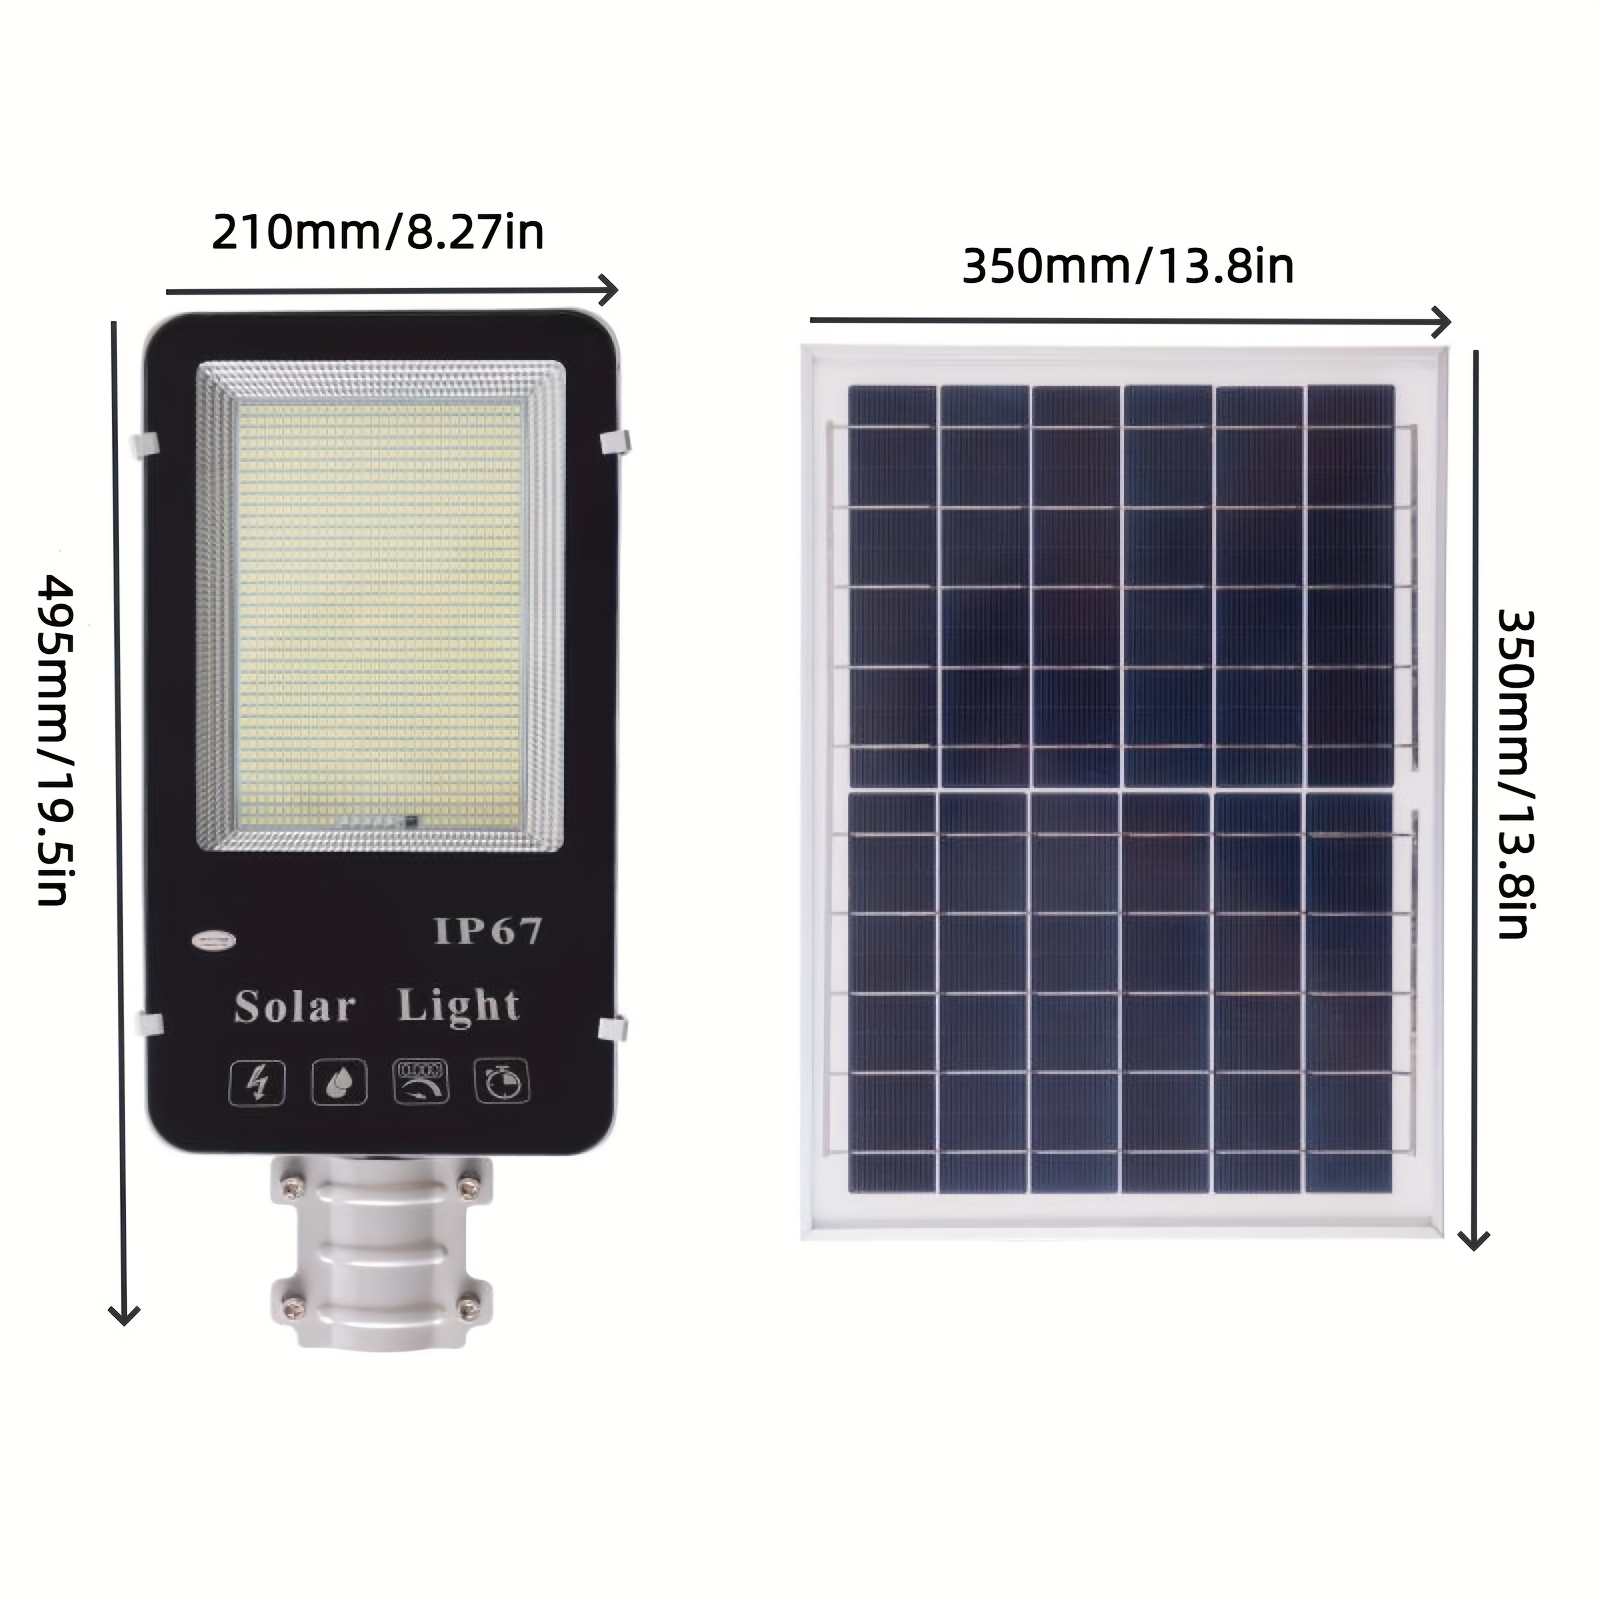 1pc 300w solar street light outdoor parking lot light dusk to dawn motion sensor flood light ip67 waterproof led human body induction light illuminating area of 120 square meters with remote control suitable for streets courtyards fences details 9